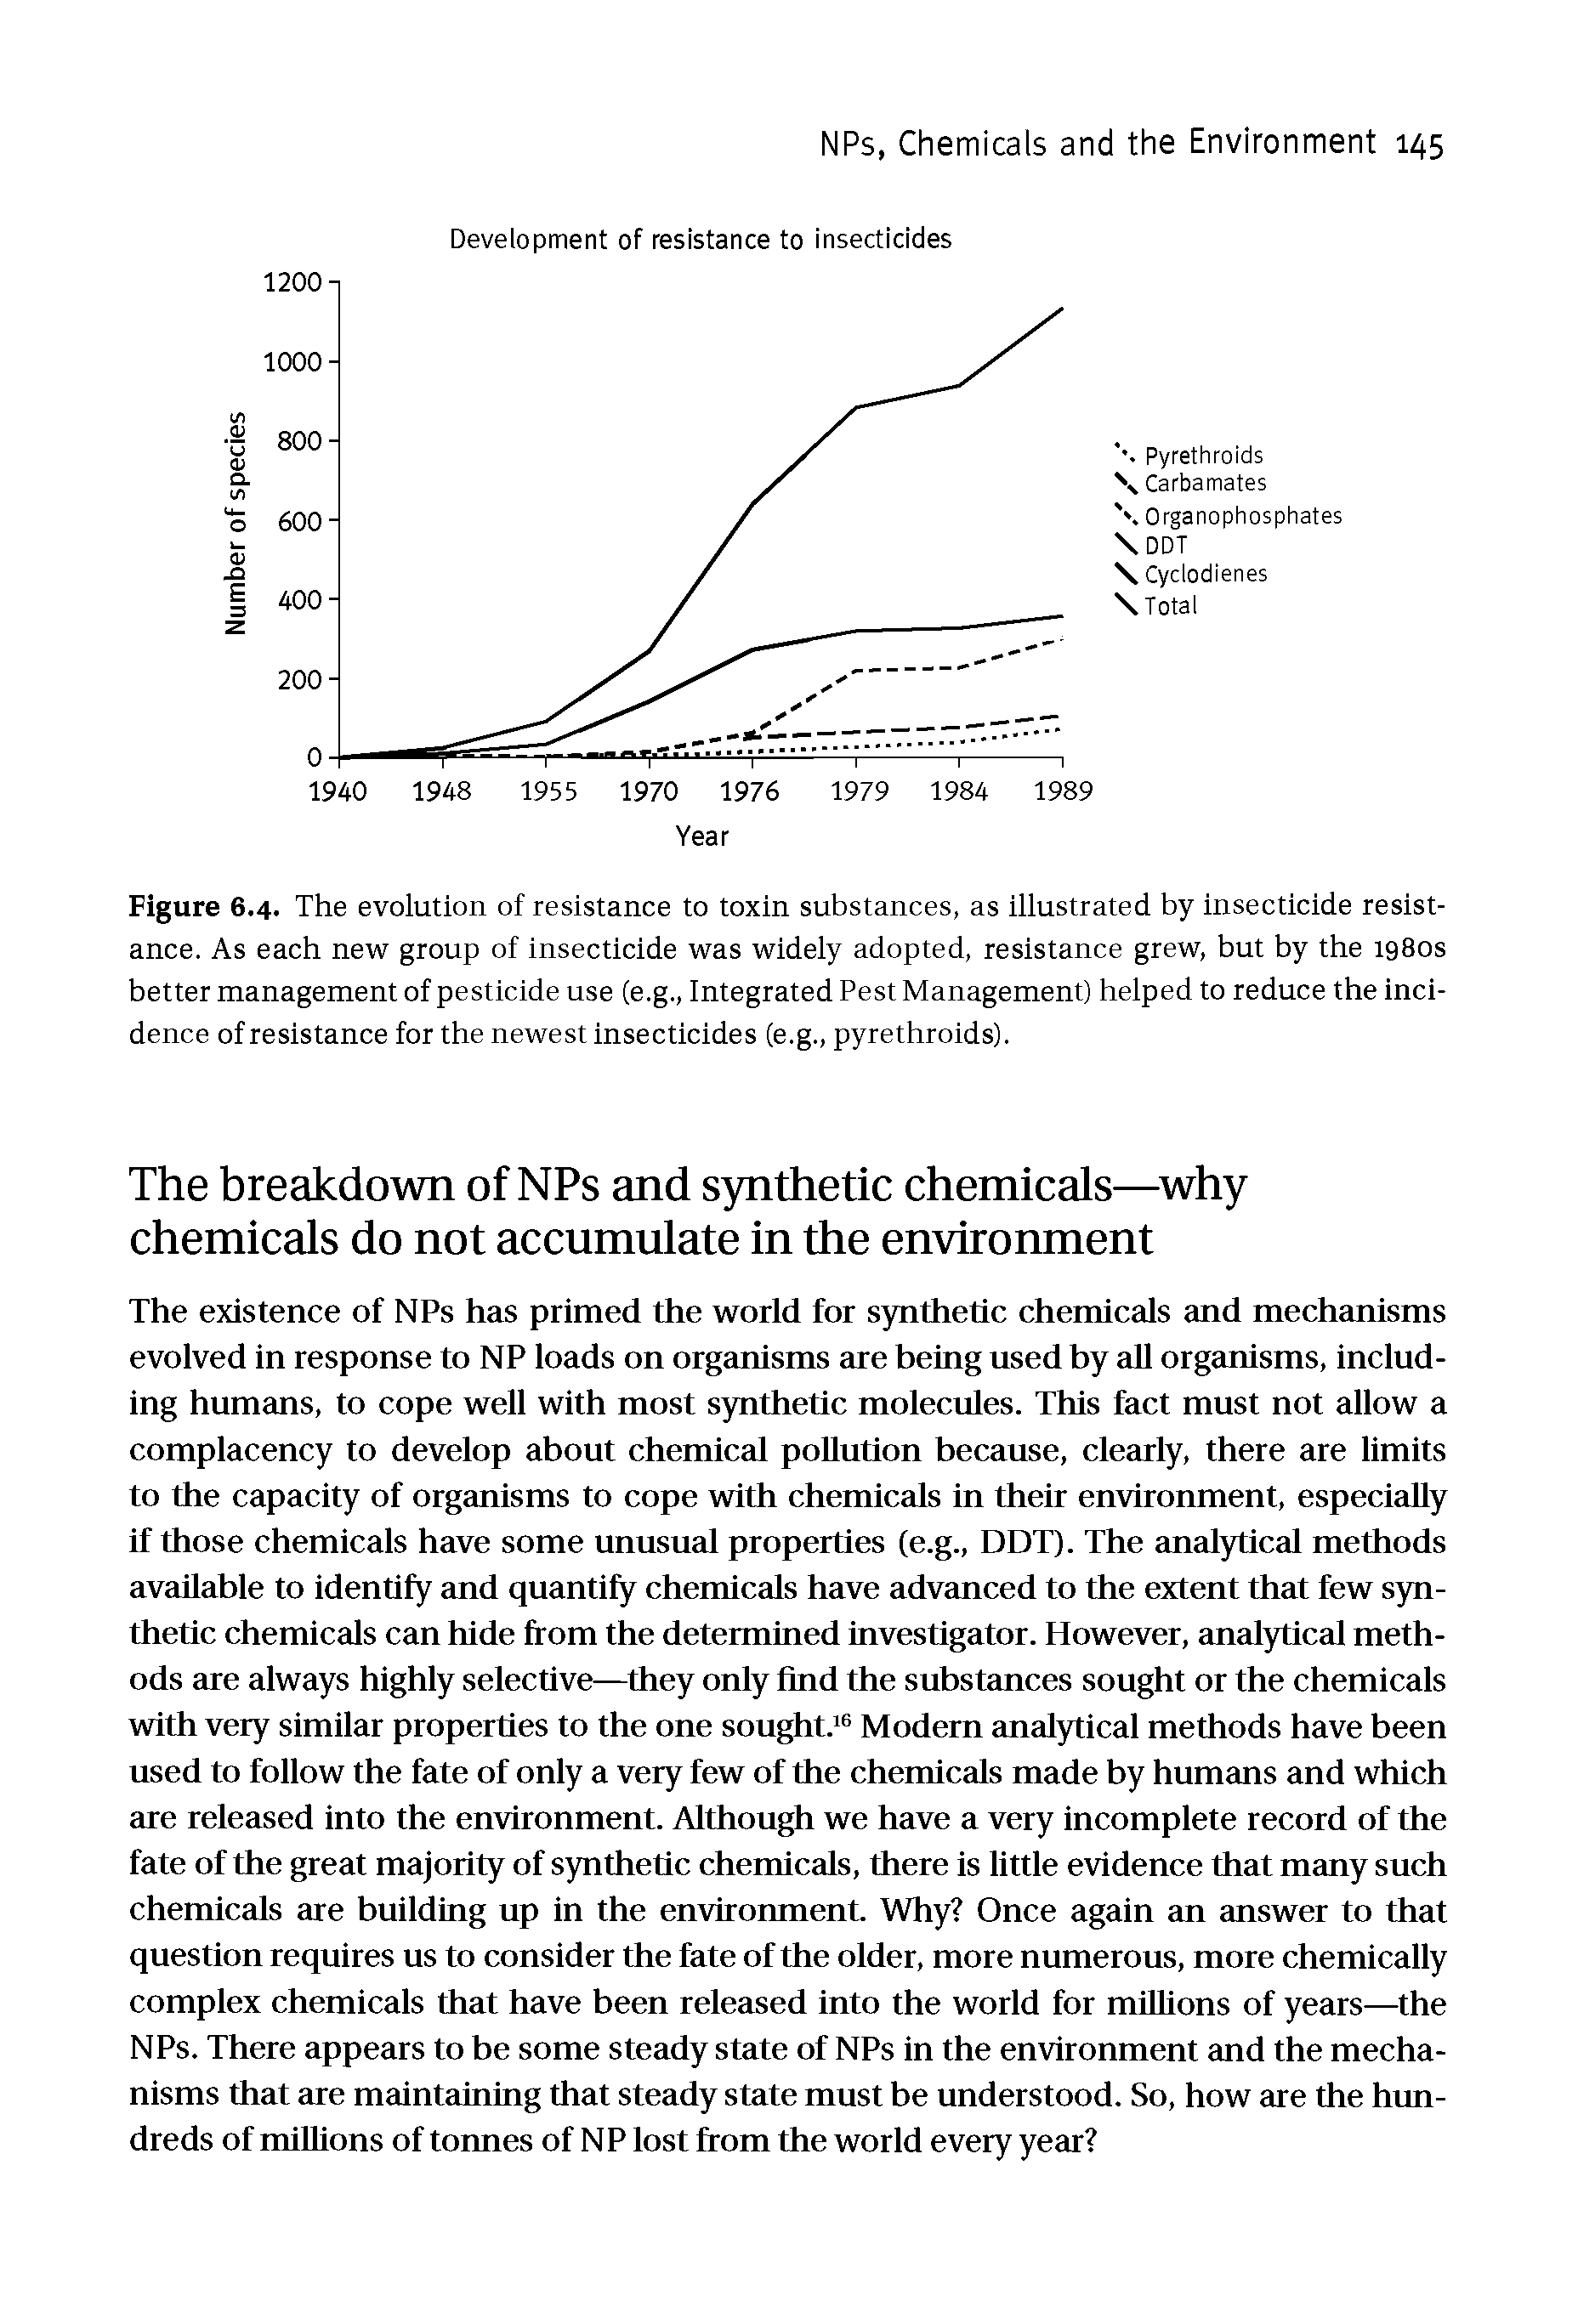 Figure 6.4. The evolution of resistance to toxin substances, as illustrated by insecticide resistance. As each new group of insecticide was widely adopted, resistance grew, but by the 1980s better management of pesticide use (e.g.. Integrated Pest Management) helped to reduce the incidence of resistance for the newest insecticides (e.g., pyrethroids).